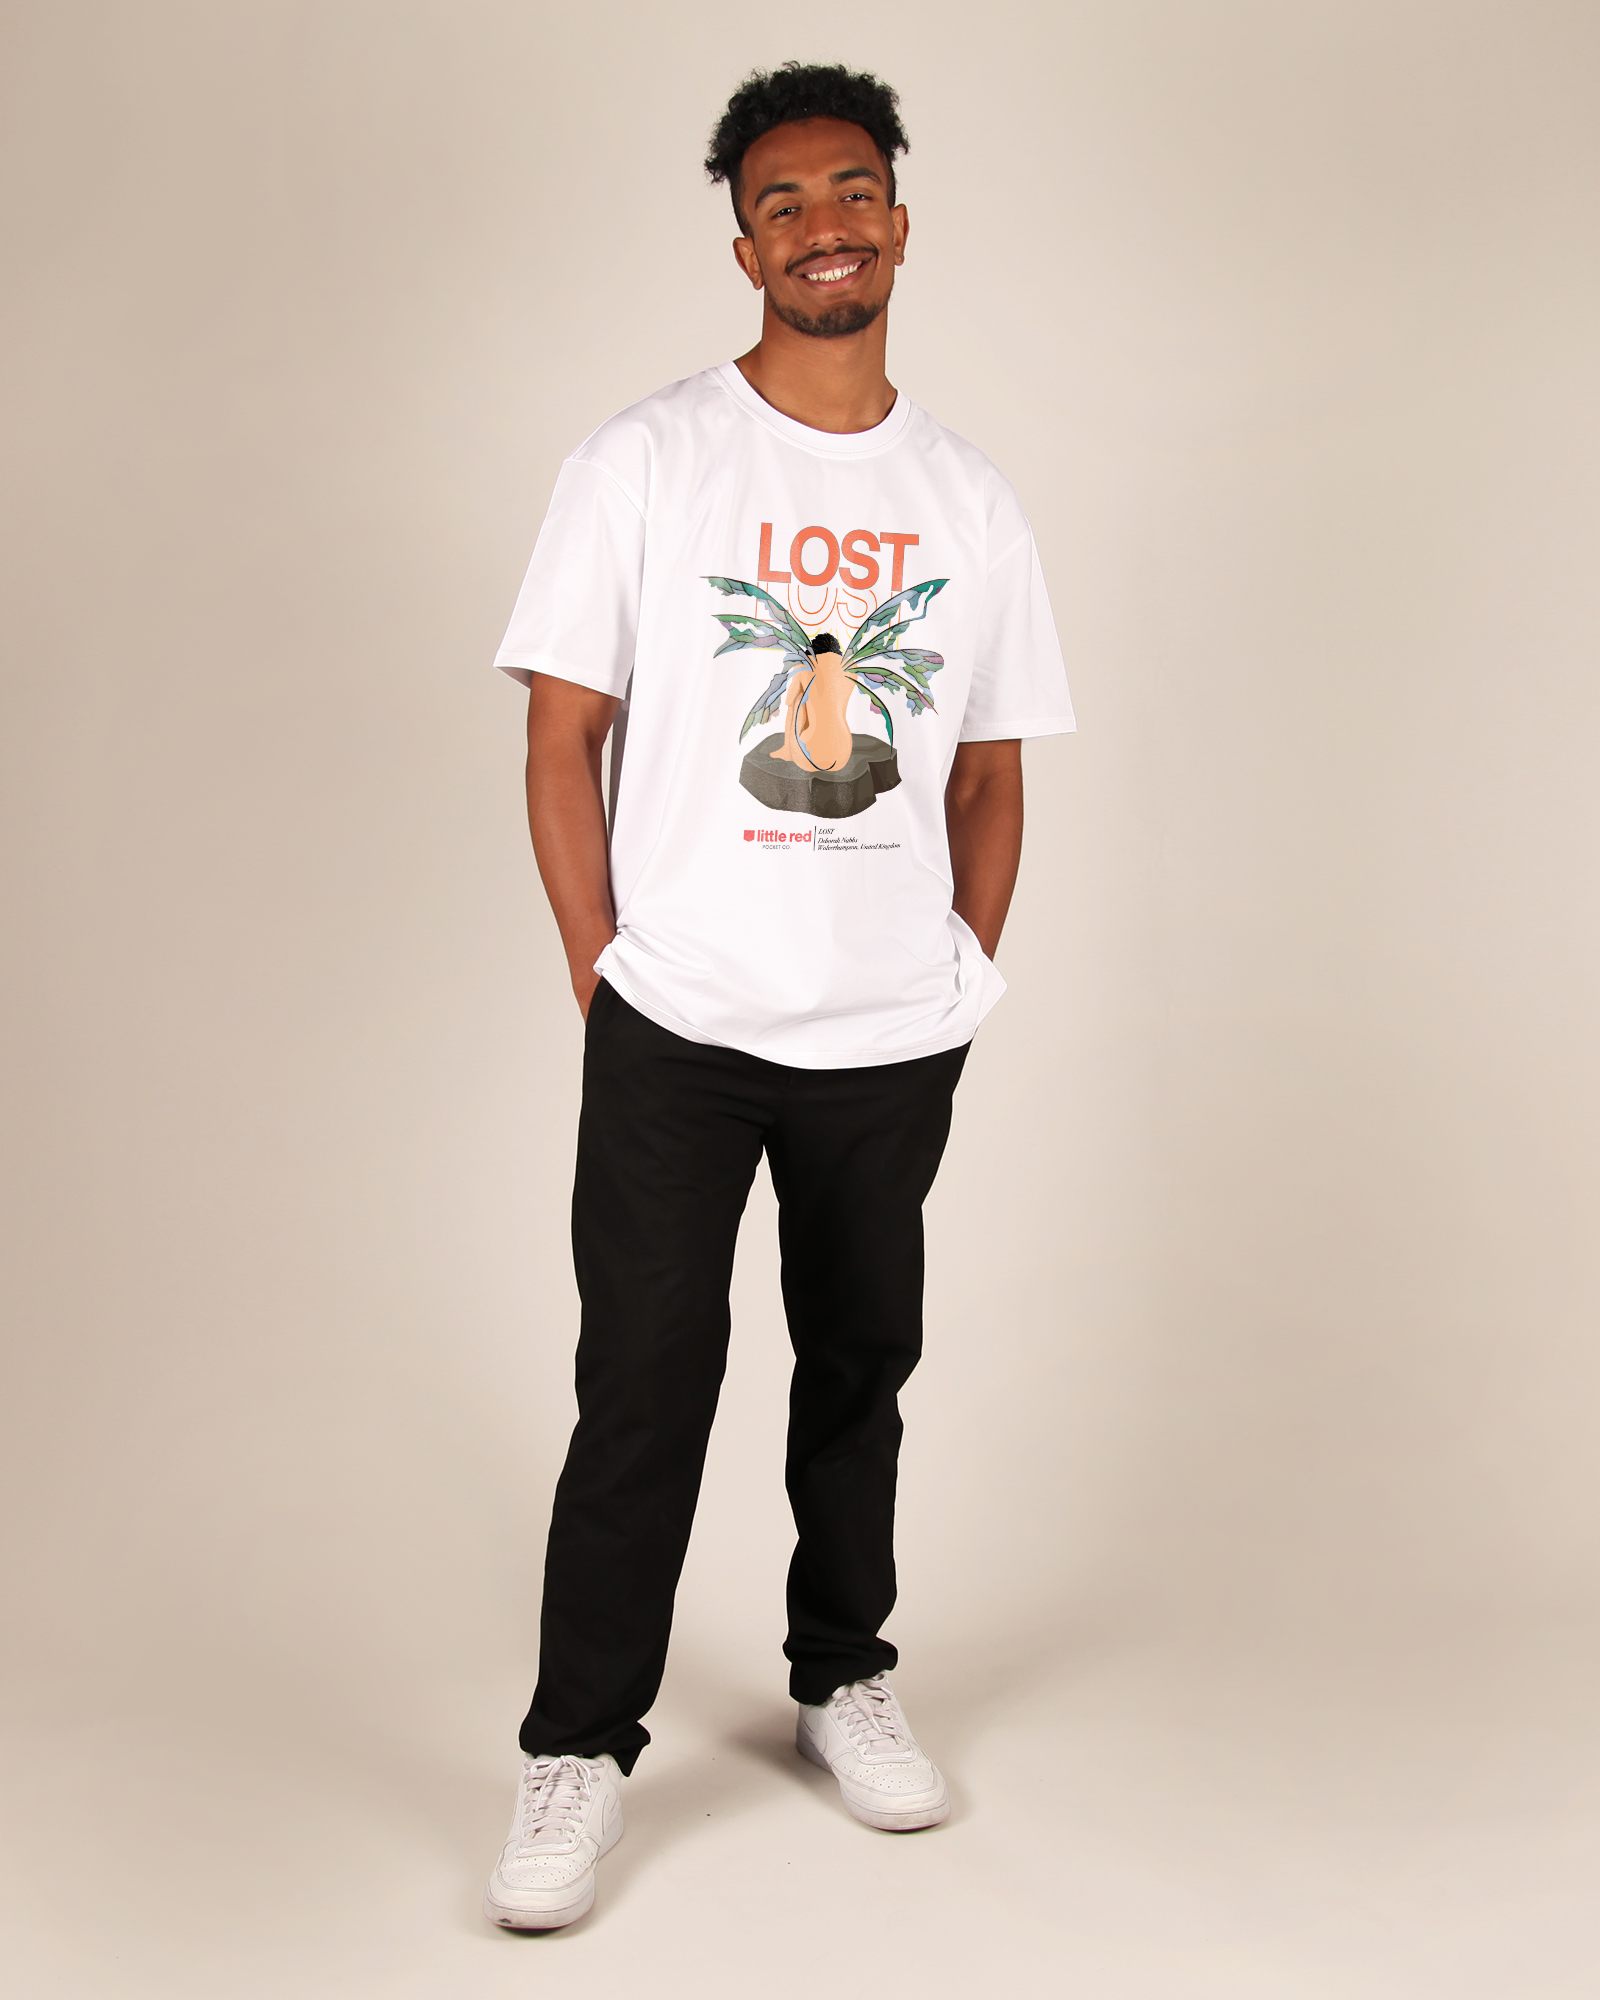 "Lost" Male Tee